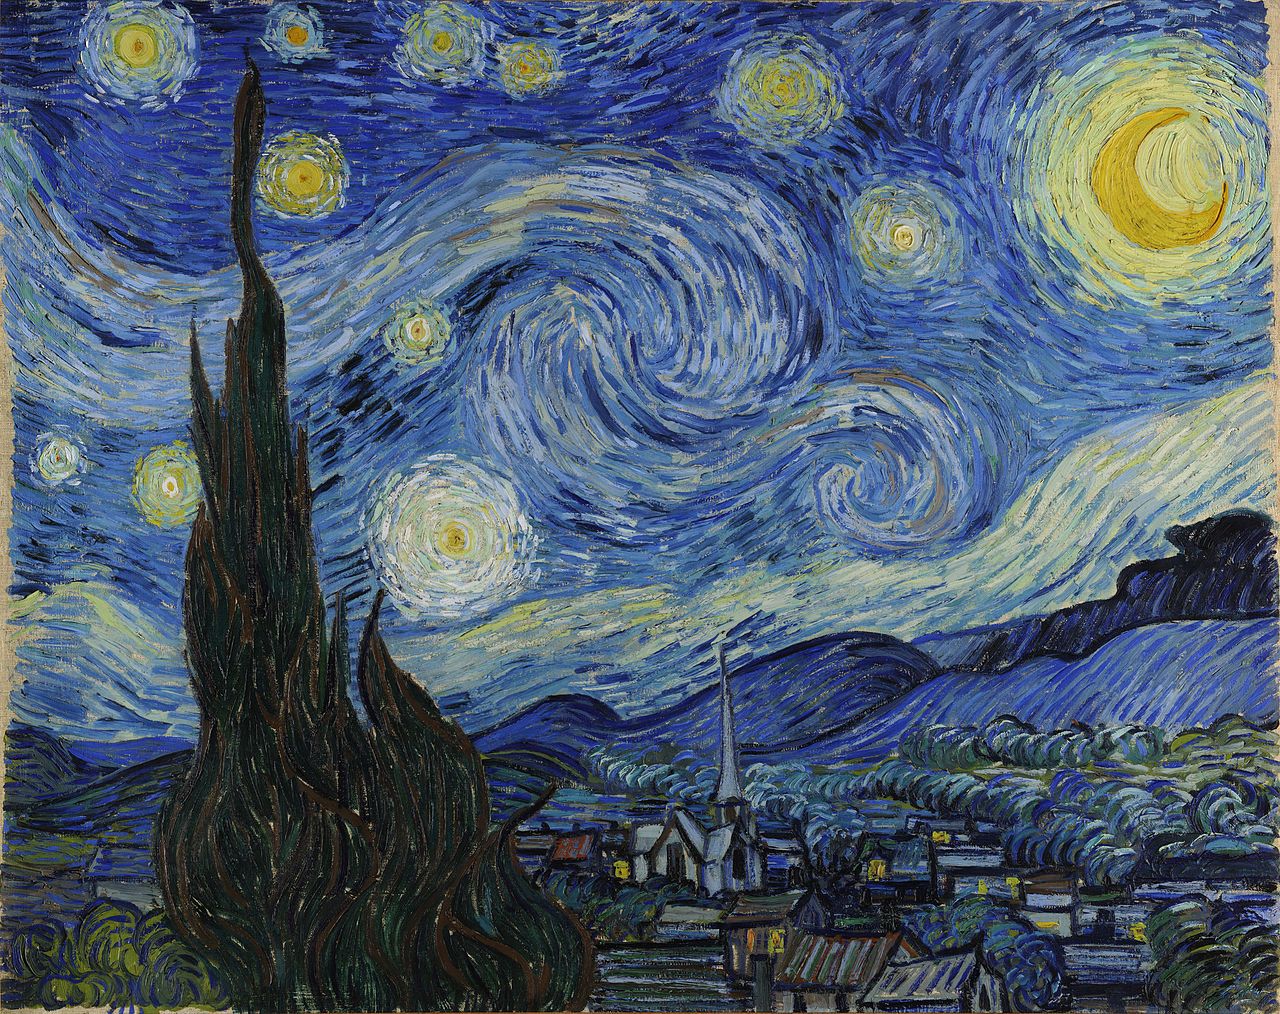 Starry night meaning of painting